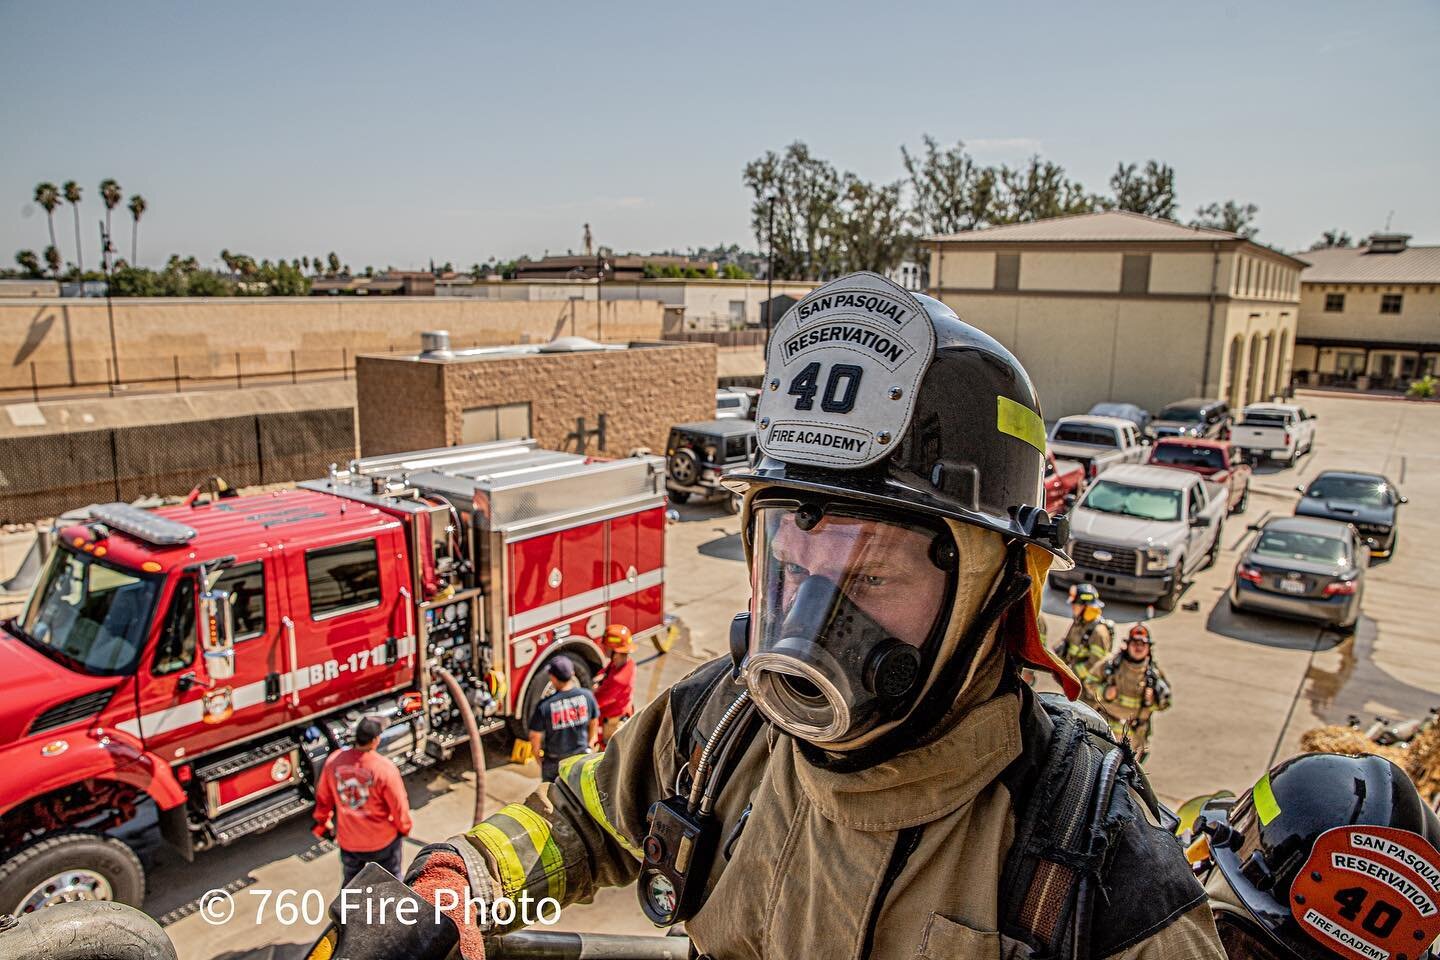 This week I was invited out to photograph, The San Pasqual Reservation Fire Academy&rsquo;s Fire control 3b burn week for @sprfa #academy40 
.
.
Many more photos to come!
.
.
.
#sprfa #fireacademy #academy40 #fire #firefighter #futurefirefighter #fir